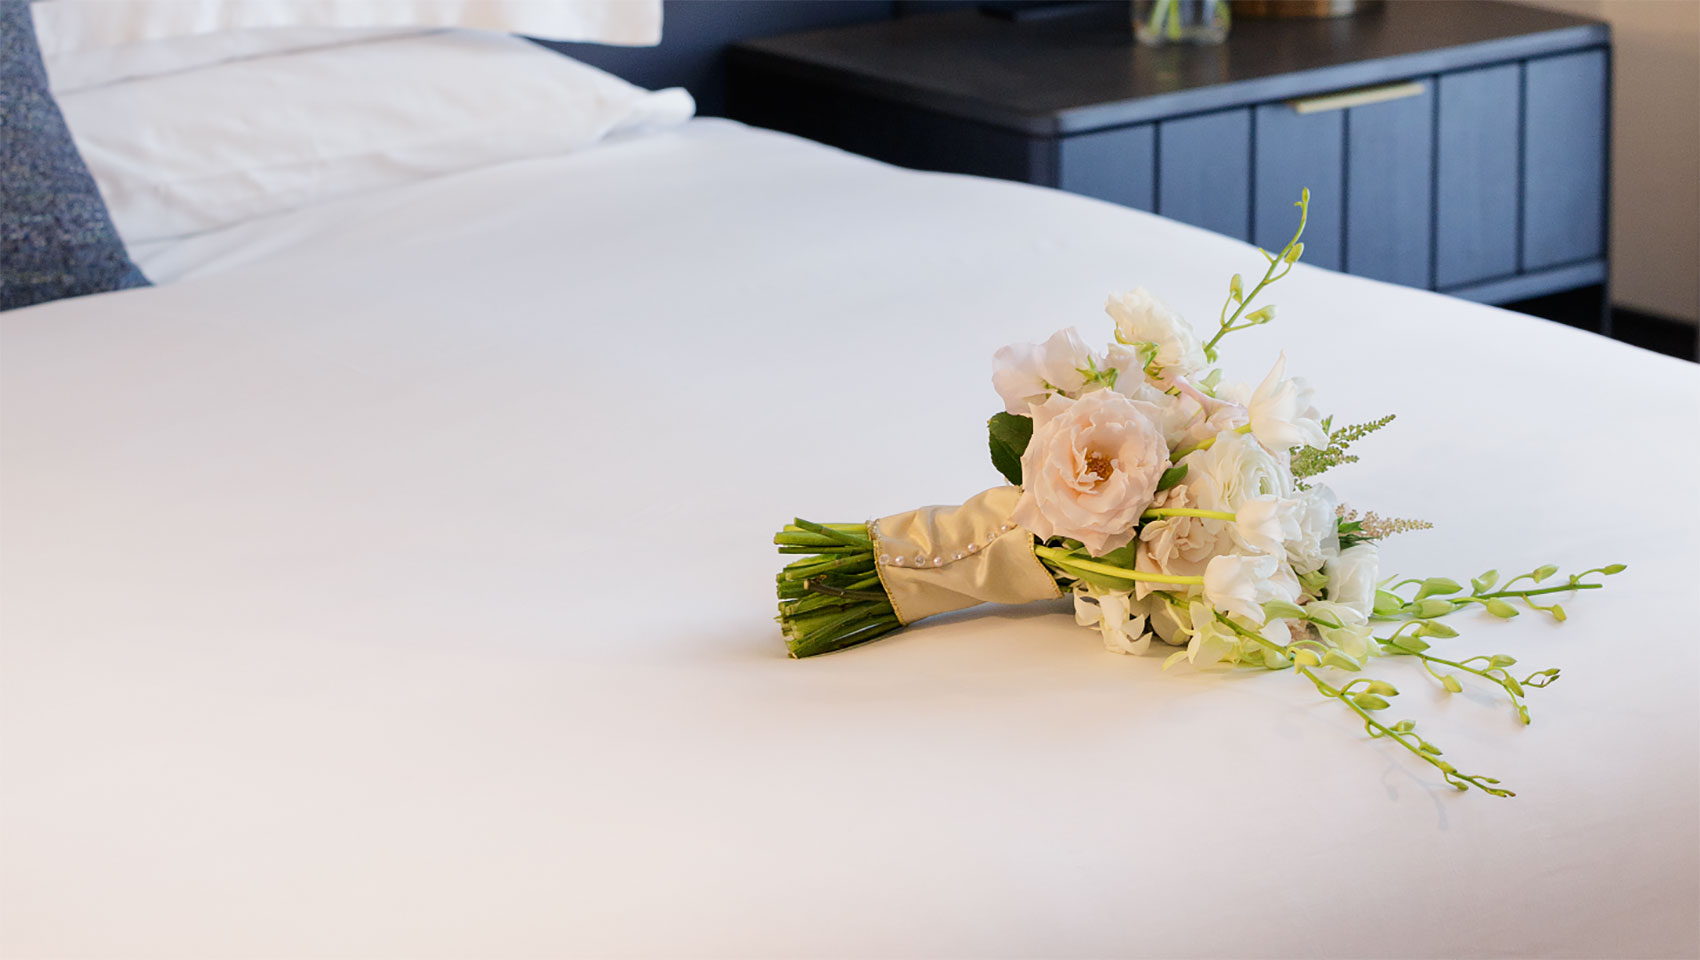 Flower bouquet on bed